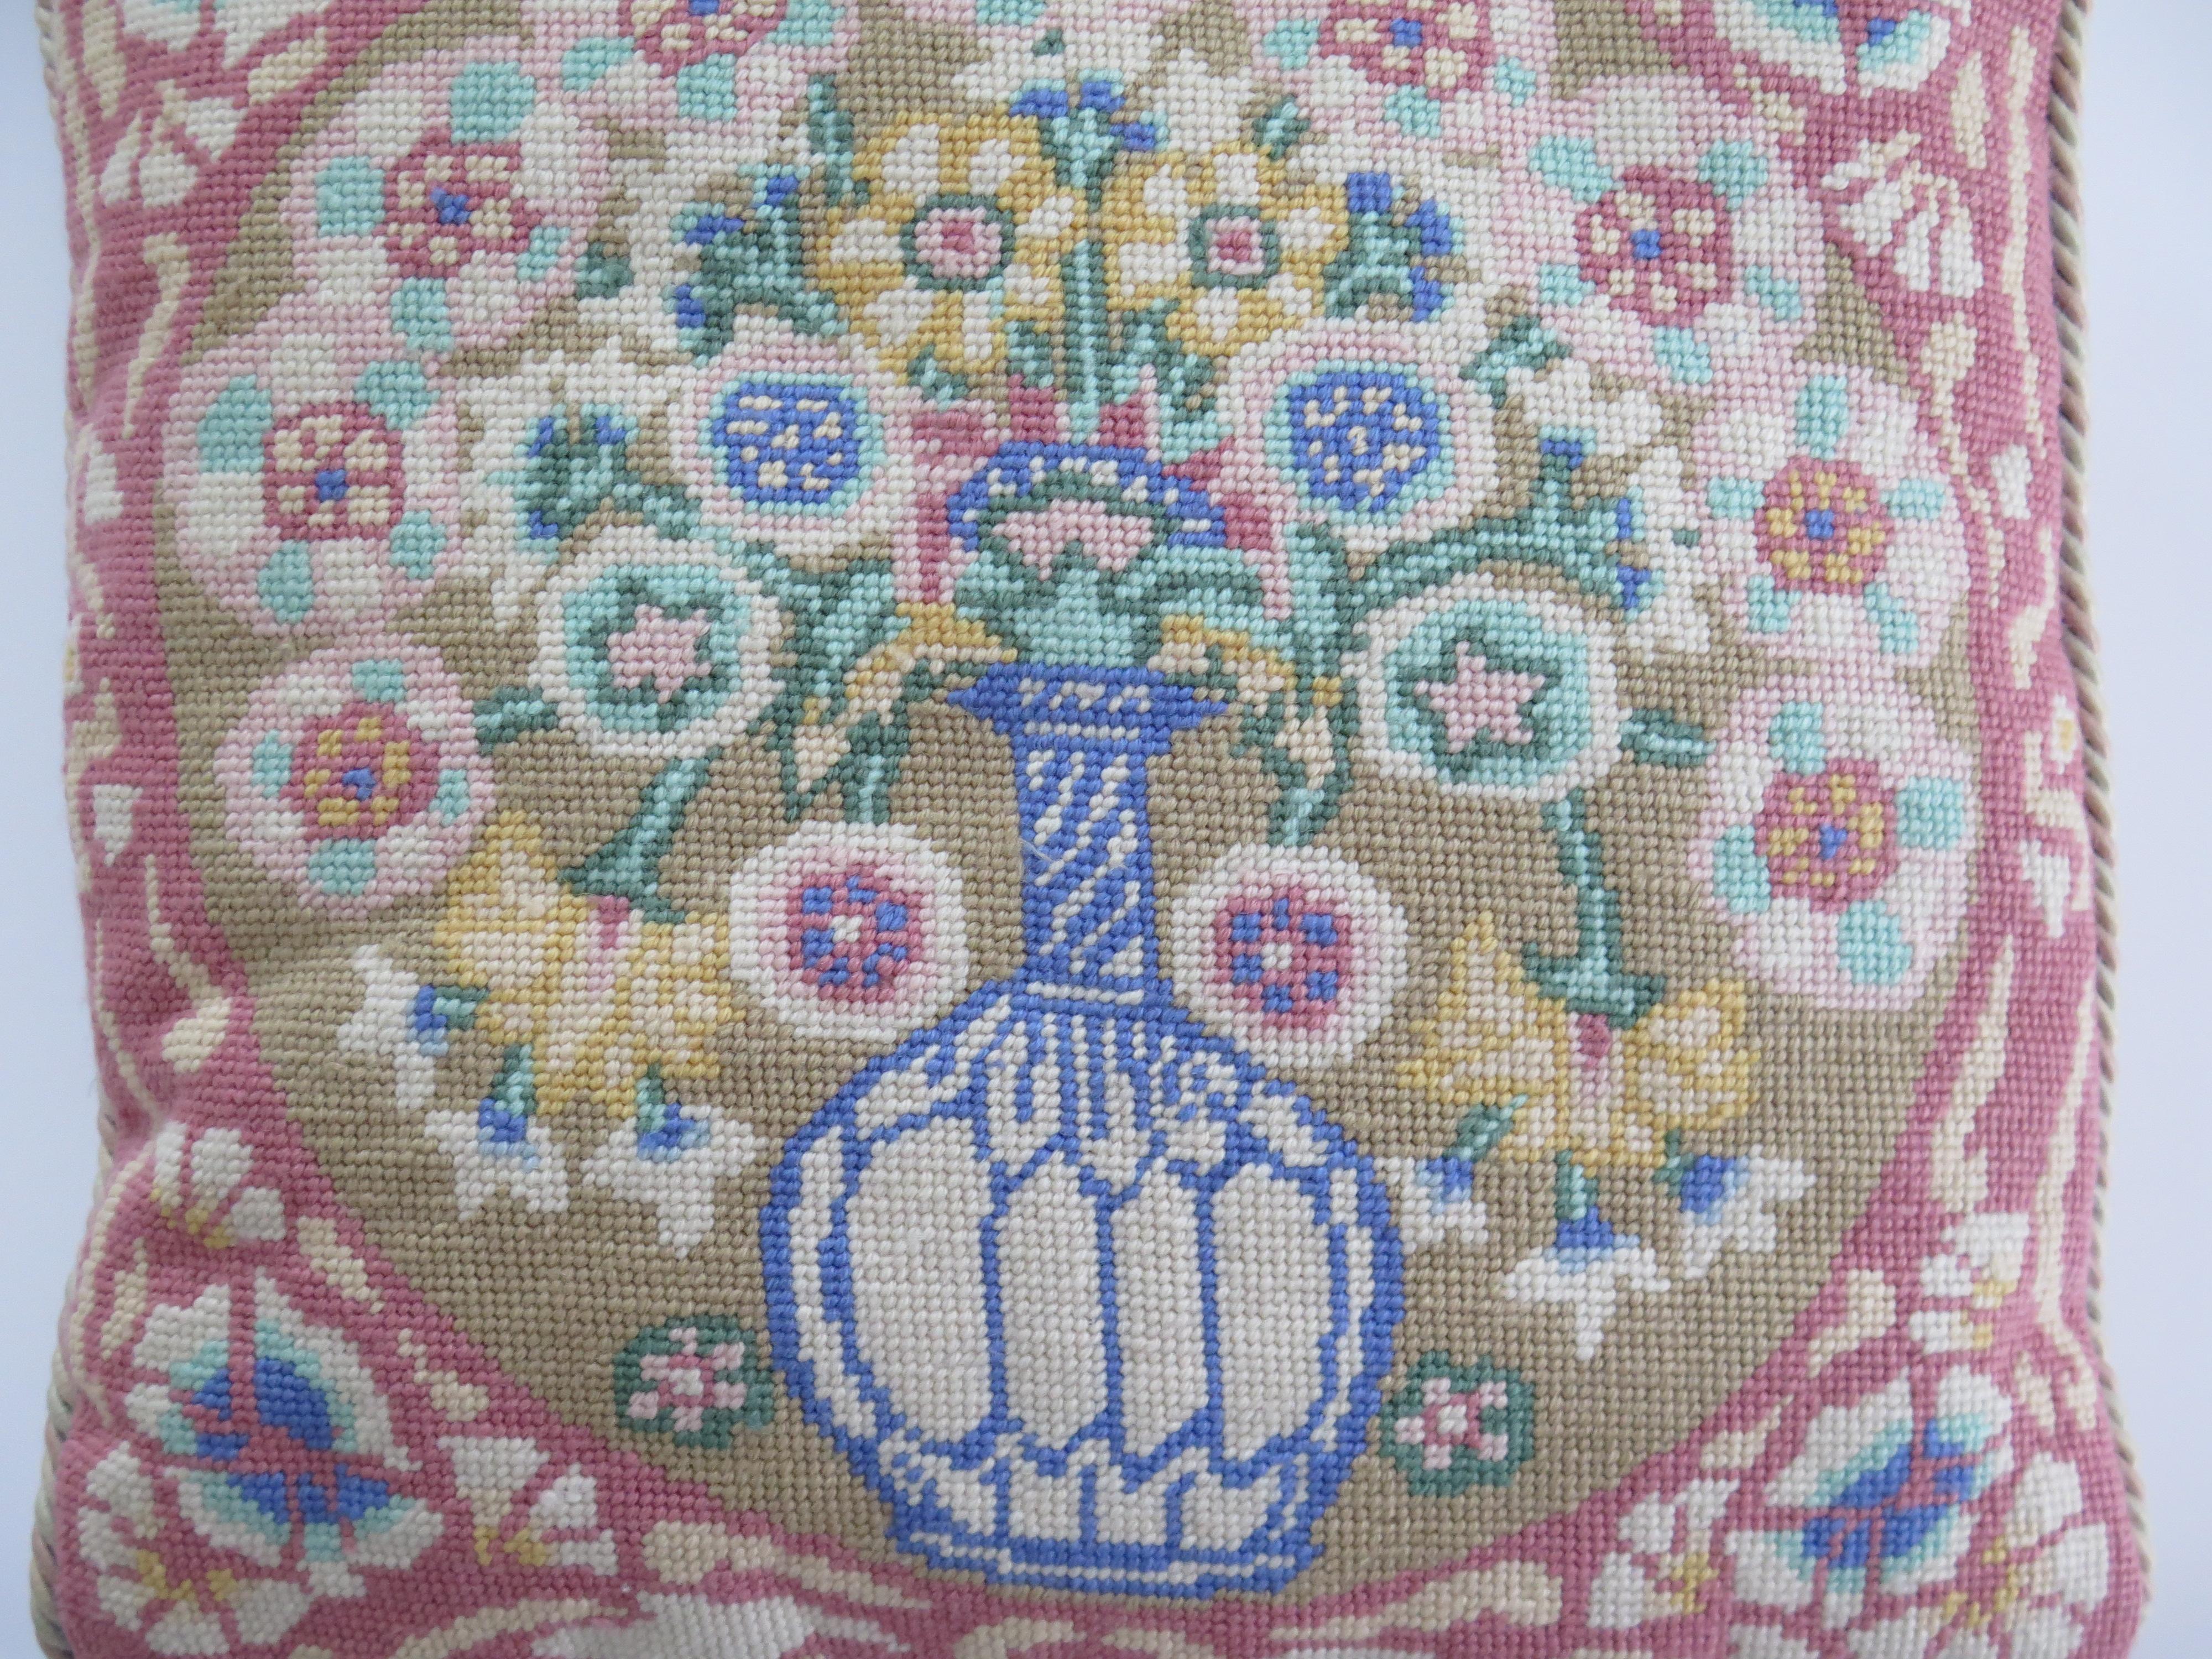 Woven Cushion or Pillow with Flower Vase pattern in pastel shades, Circa 1930s For Sale 2